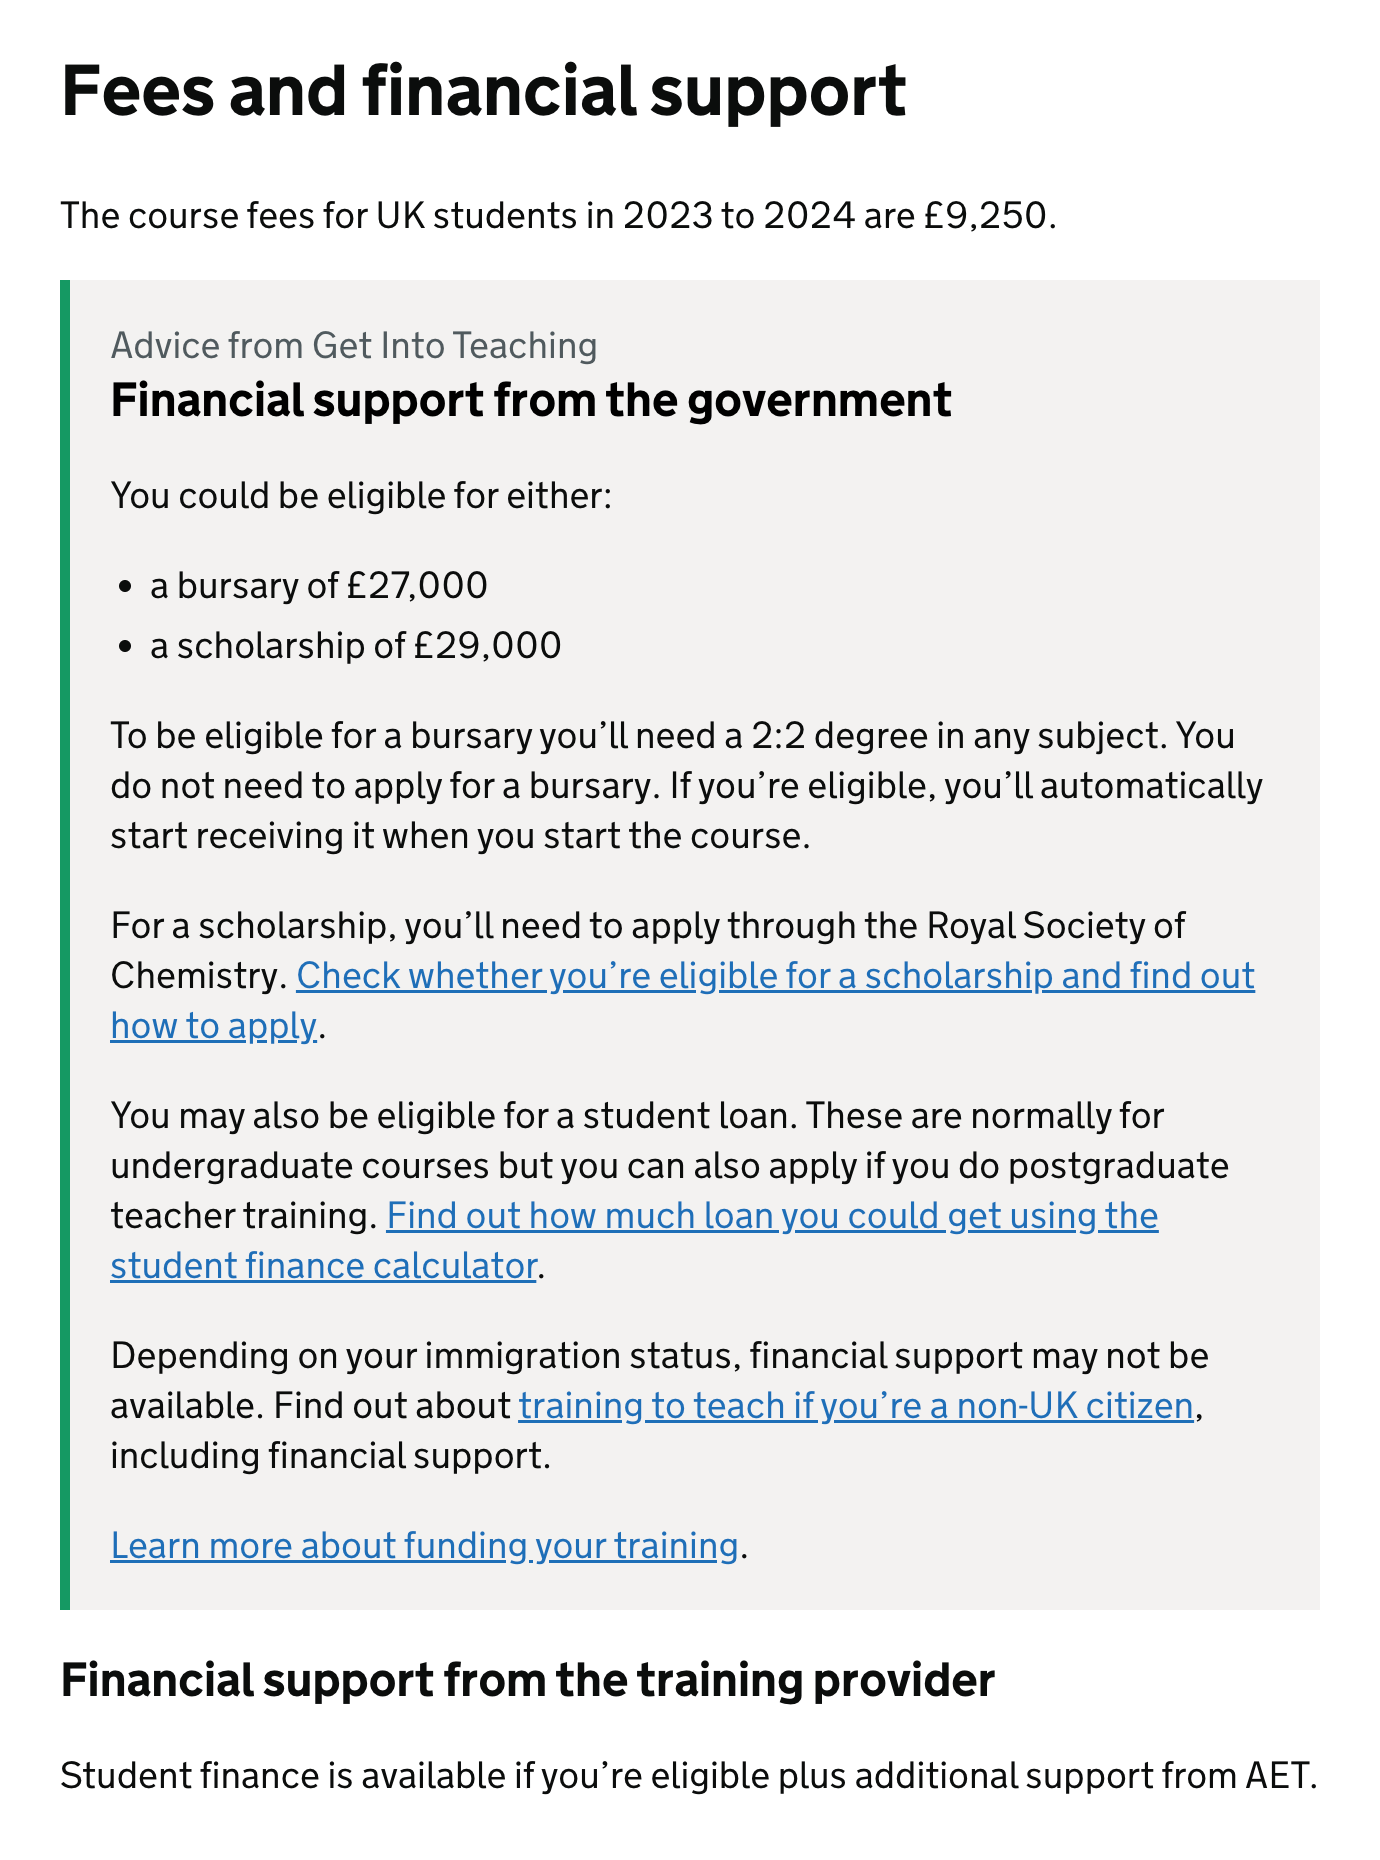 Financial support from the government - bursary and scholarship